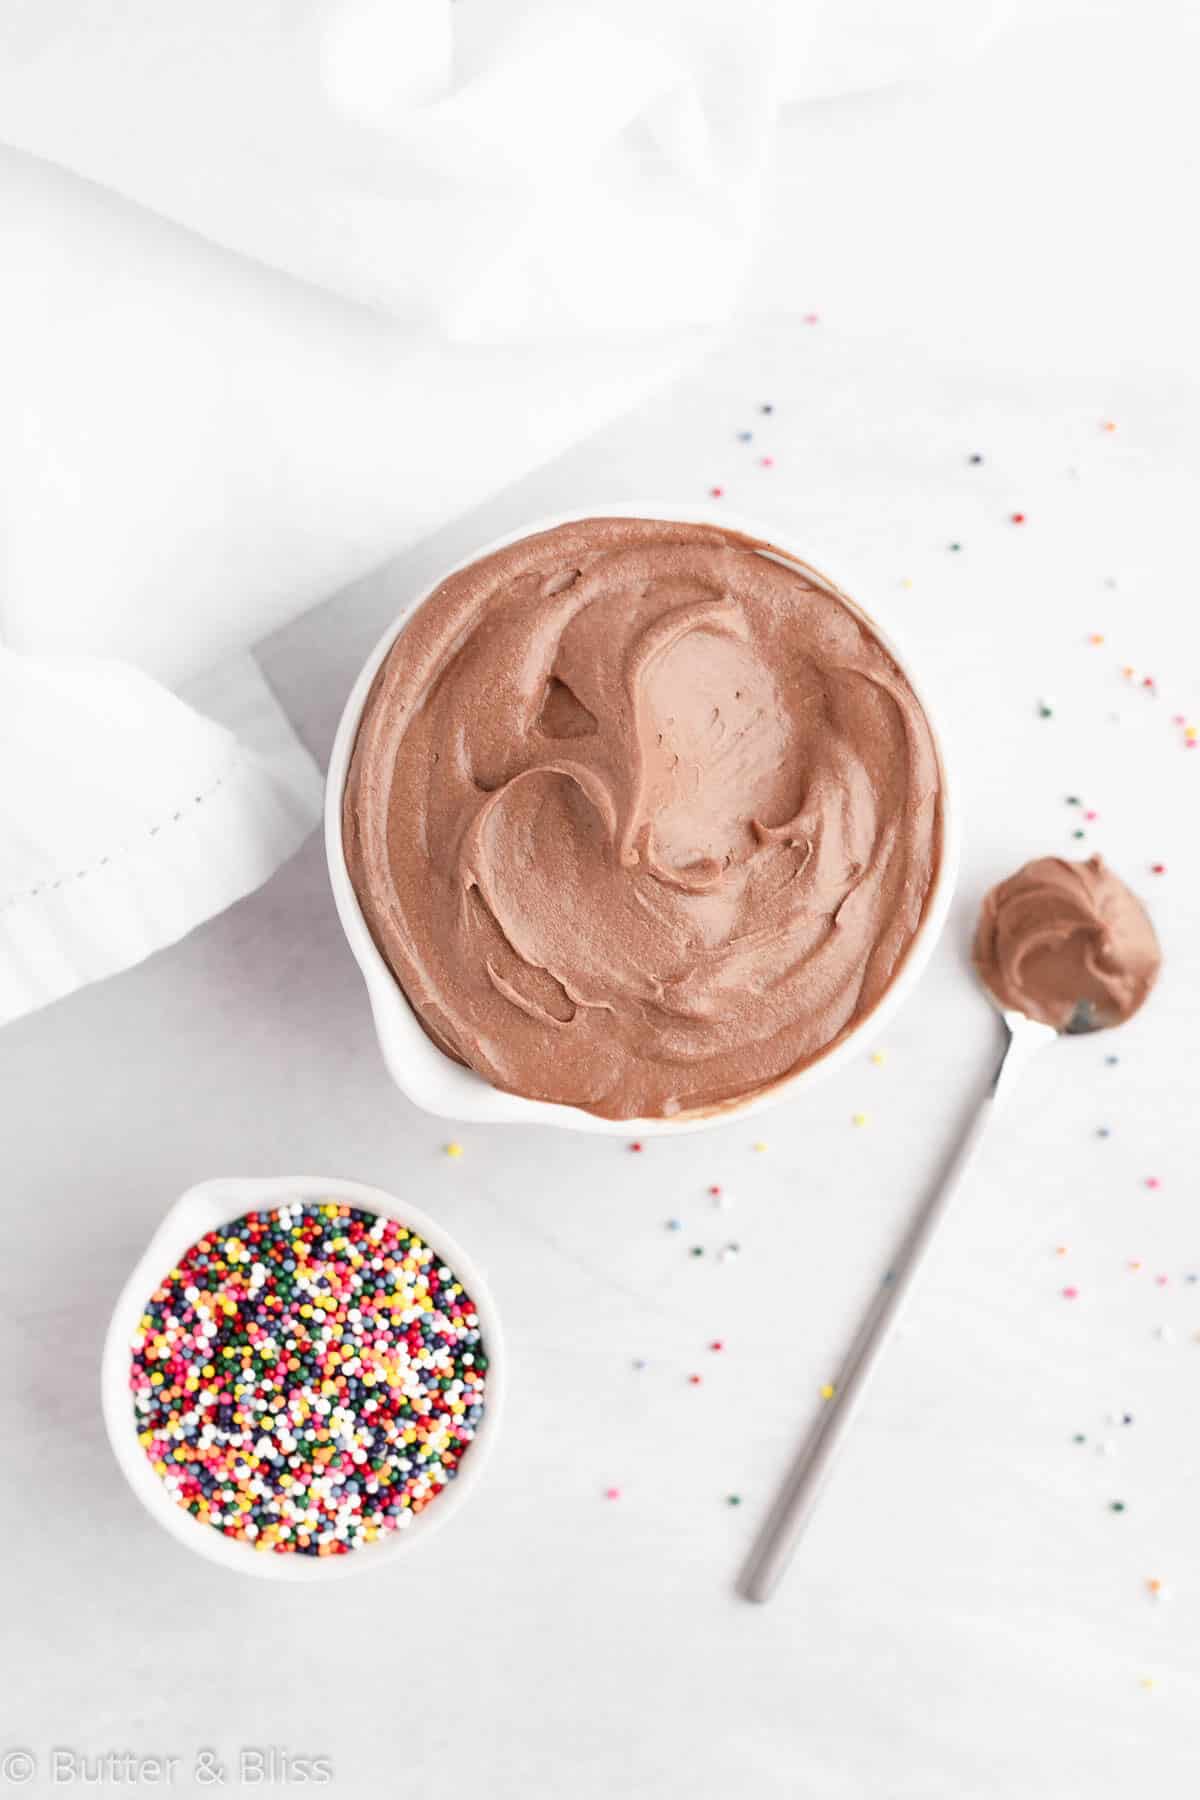 Chocolate dairy free frosting made with coconut milk in a bowl